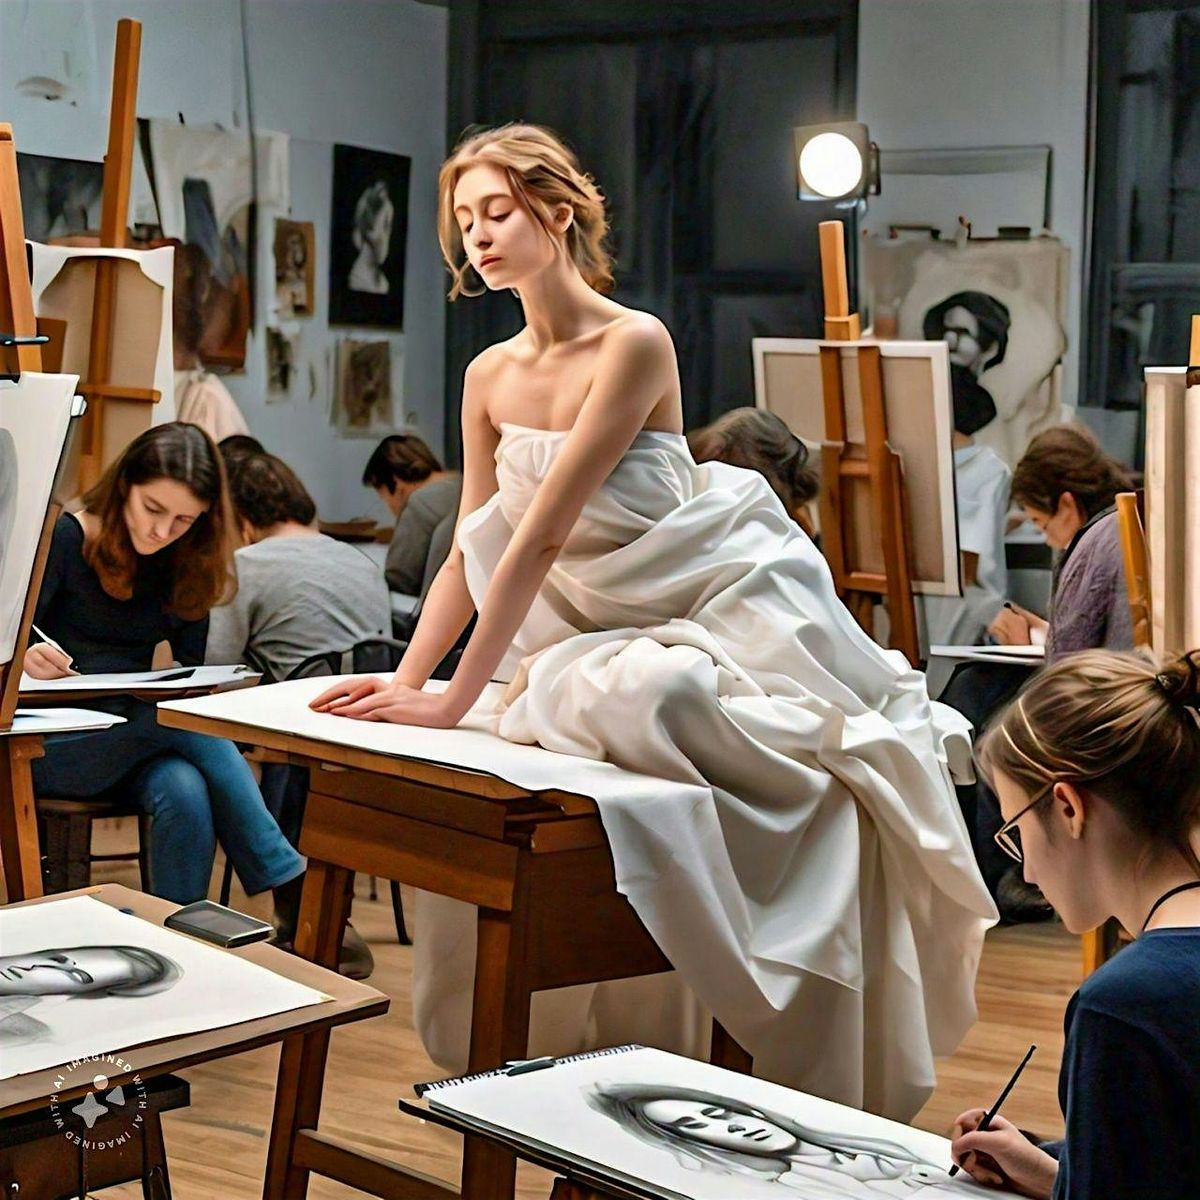 Live figure drawing with a nude model